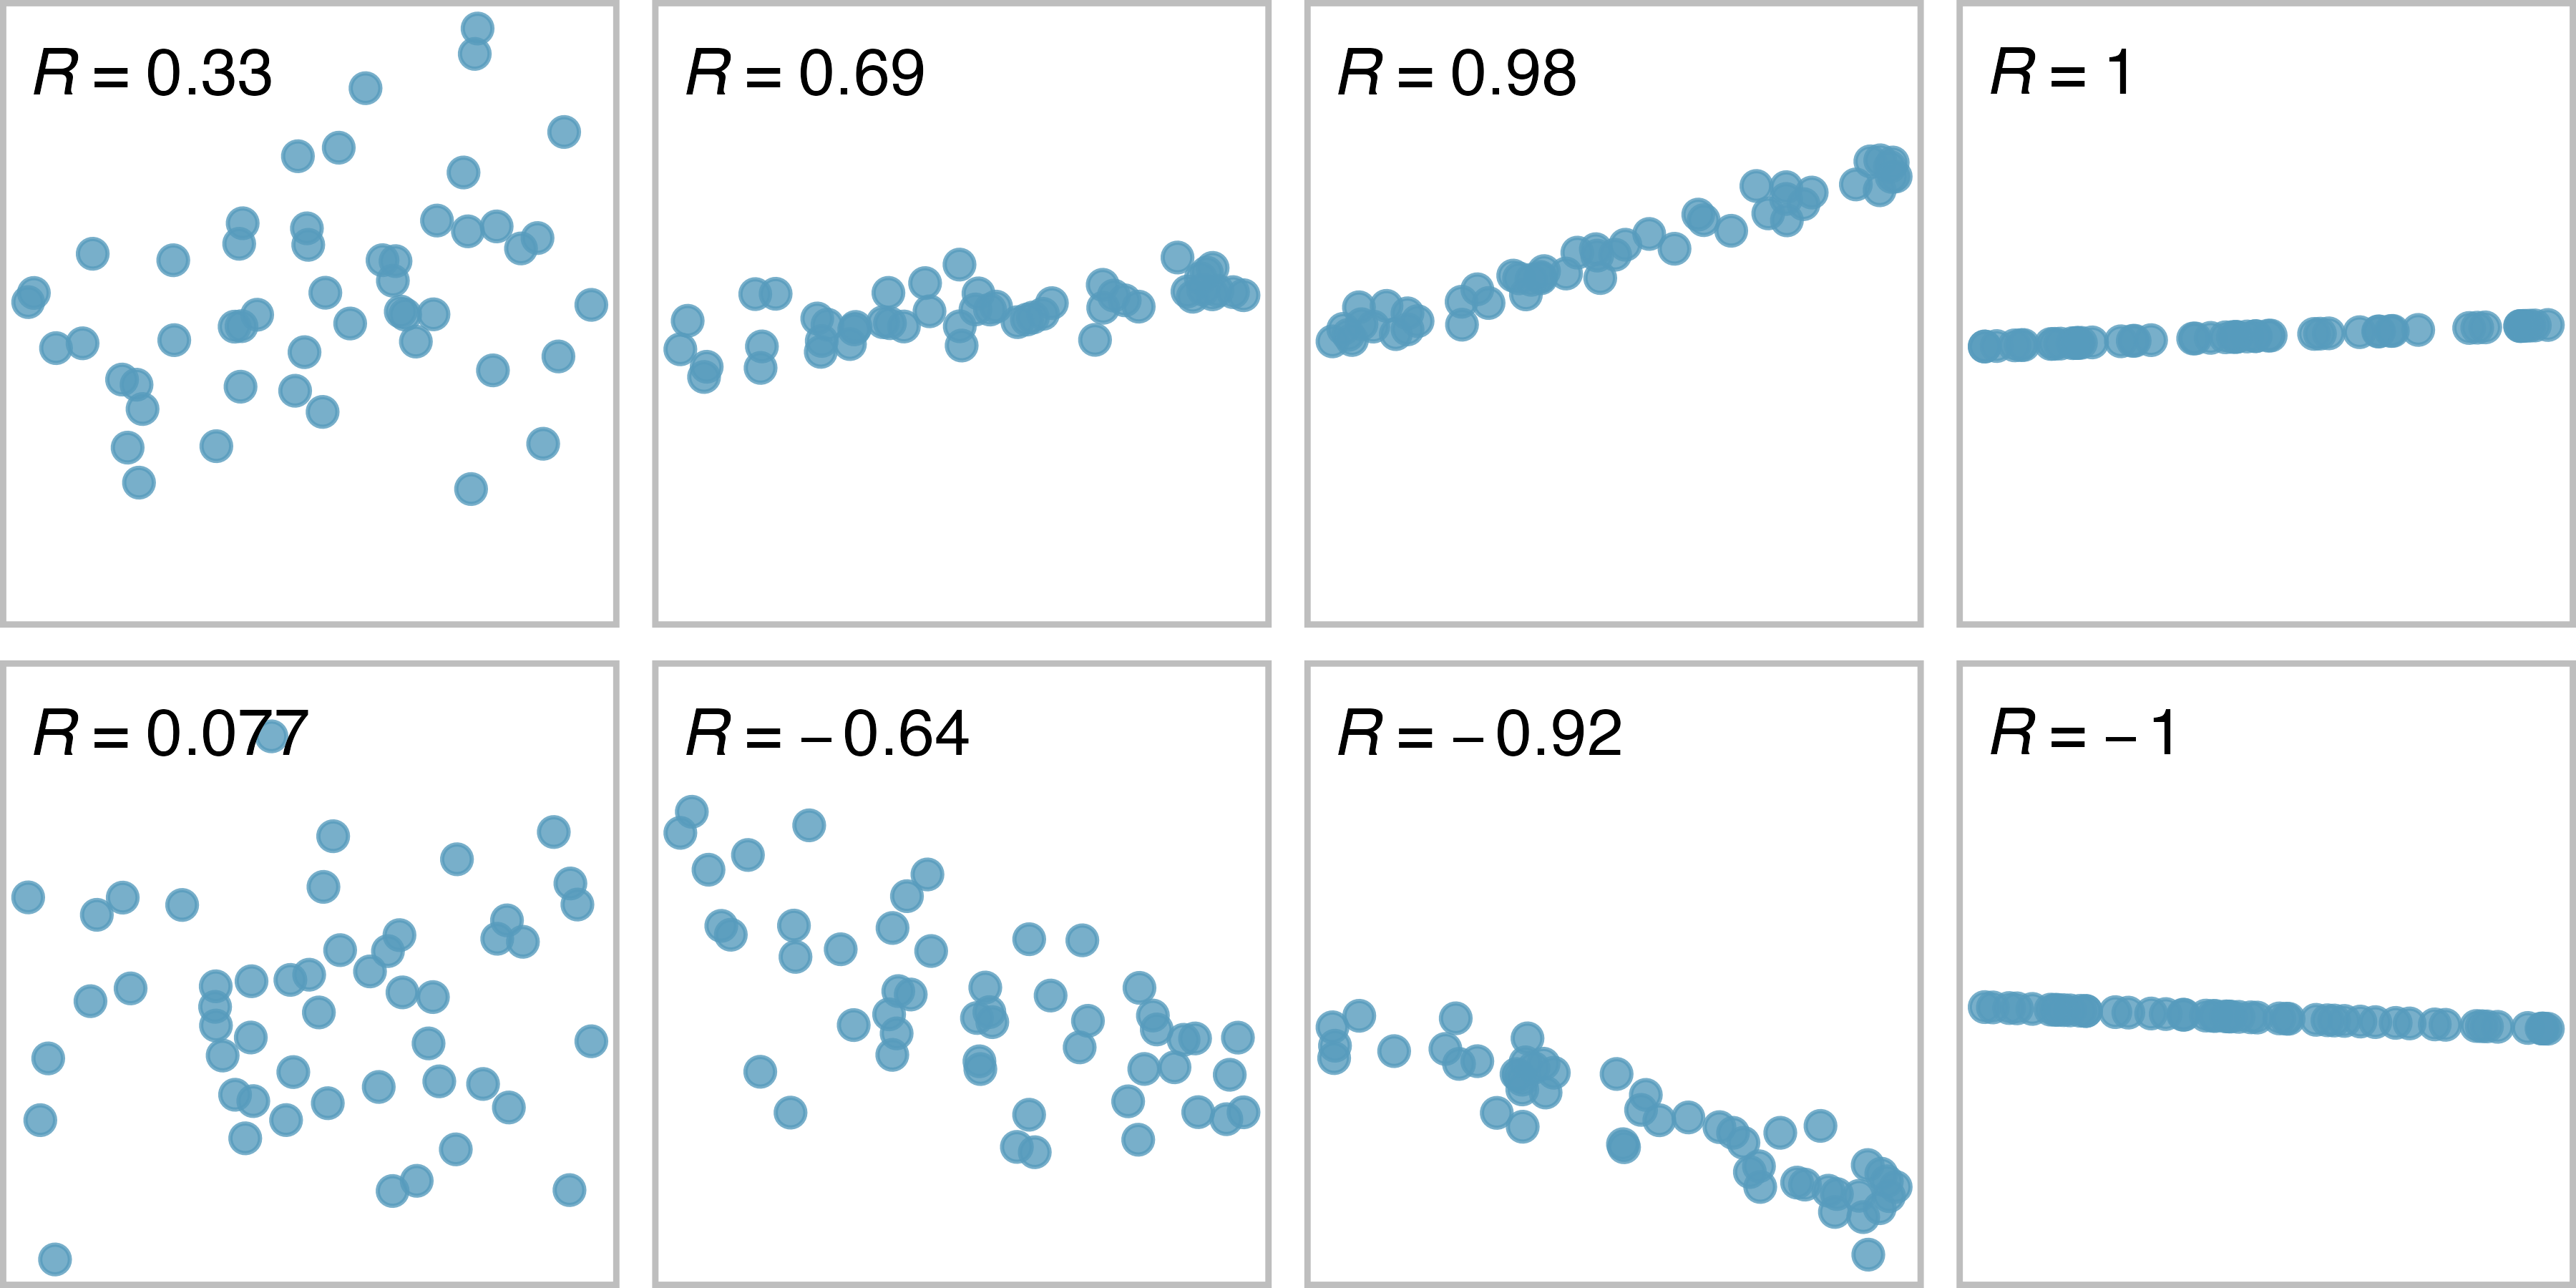 Sample scatterplots and their correlations. The first row shows variables with a positive relationshiop, represented by the trend up and to the right. The second row shows variables with a negative trend, where a large value in one variable is associated with a low value in the other.